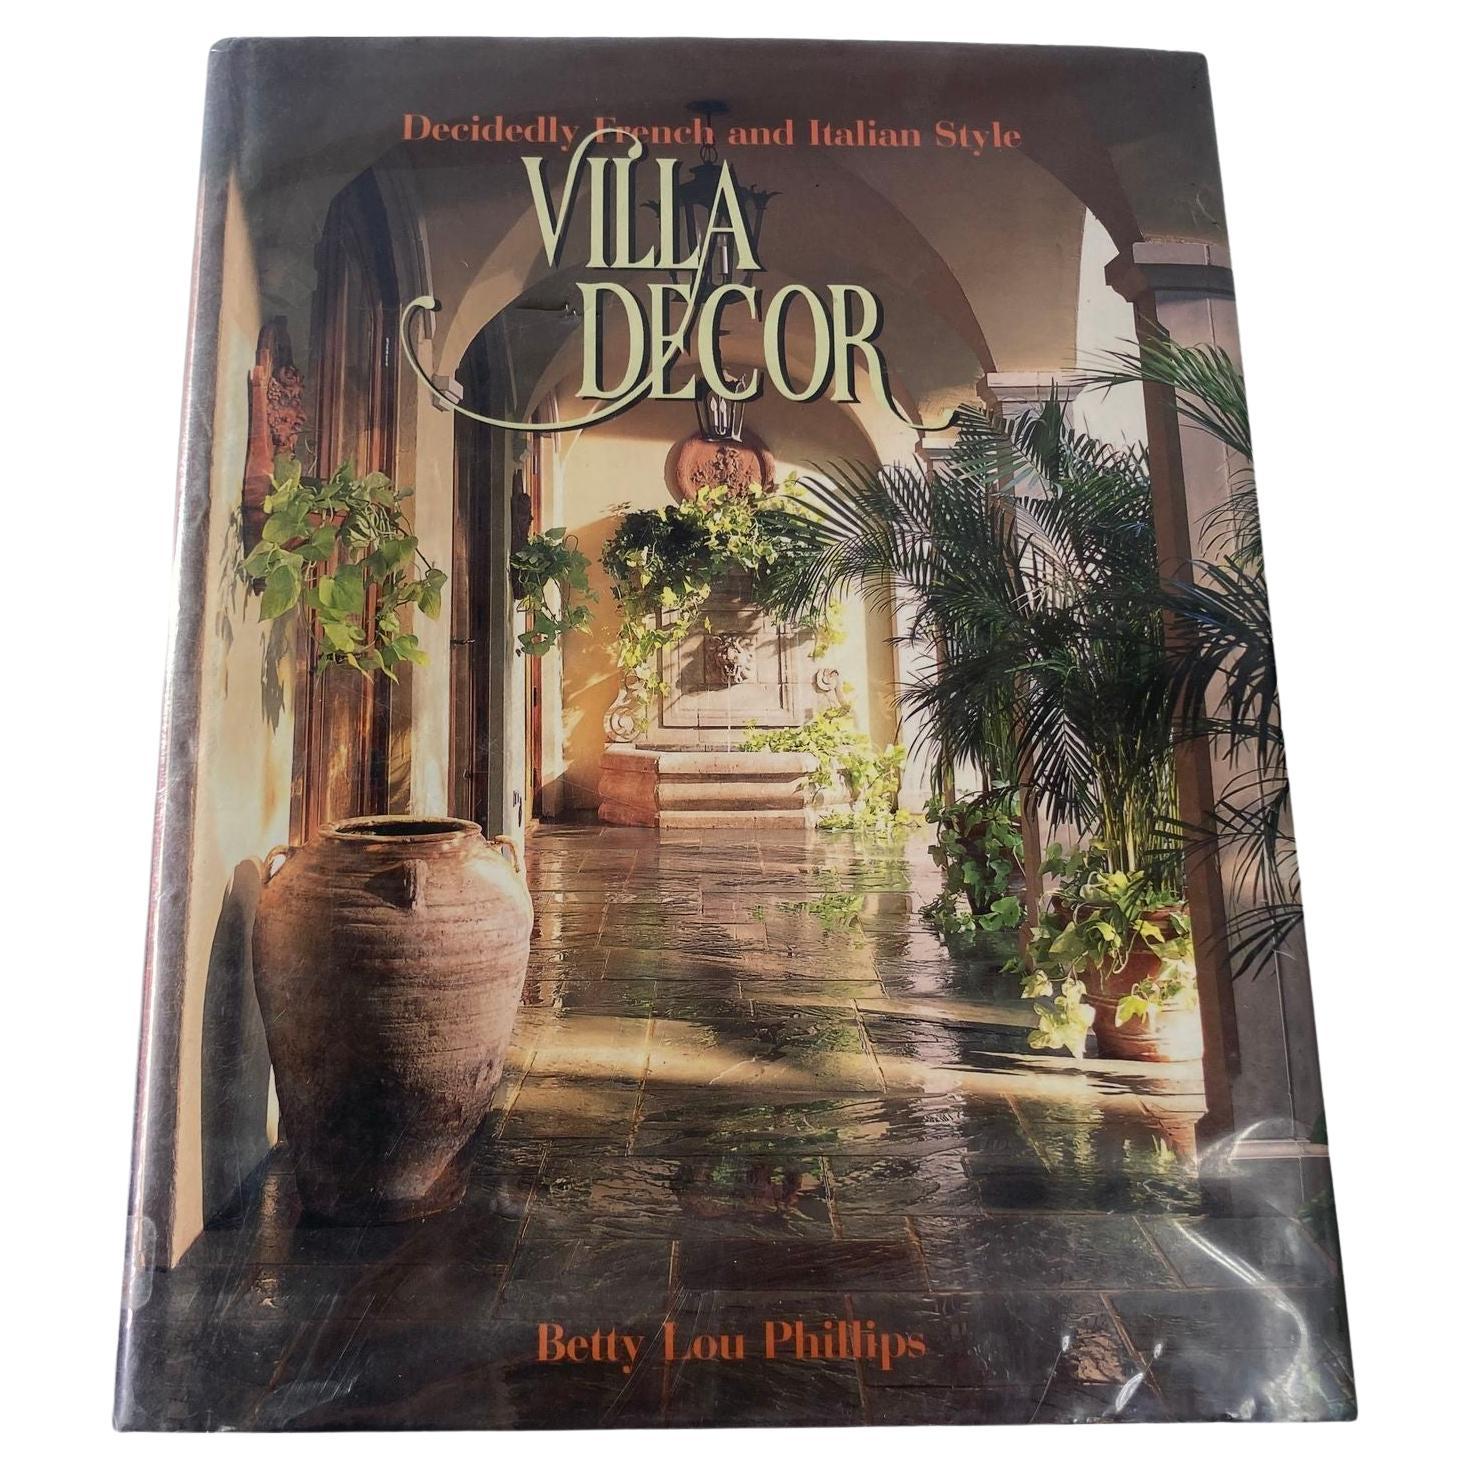 Villa Decor: Decidedly French and Italian Style Hardcover by Betty Lou Phillips